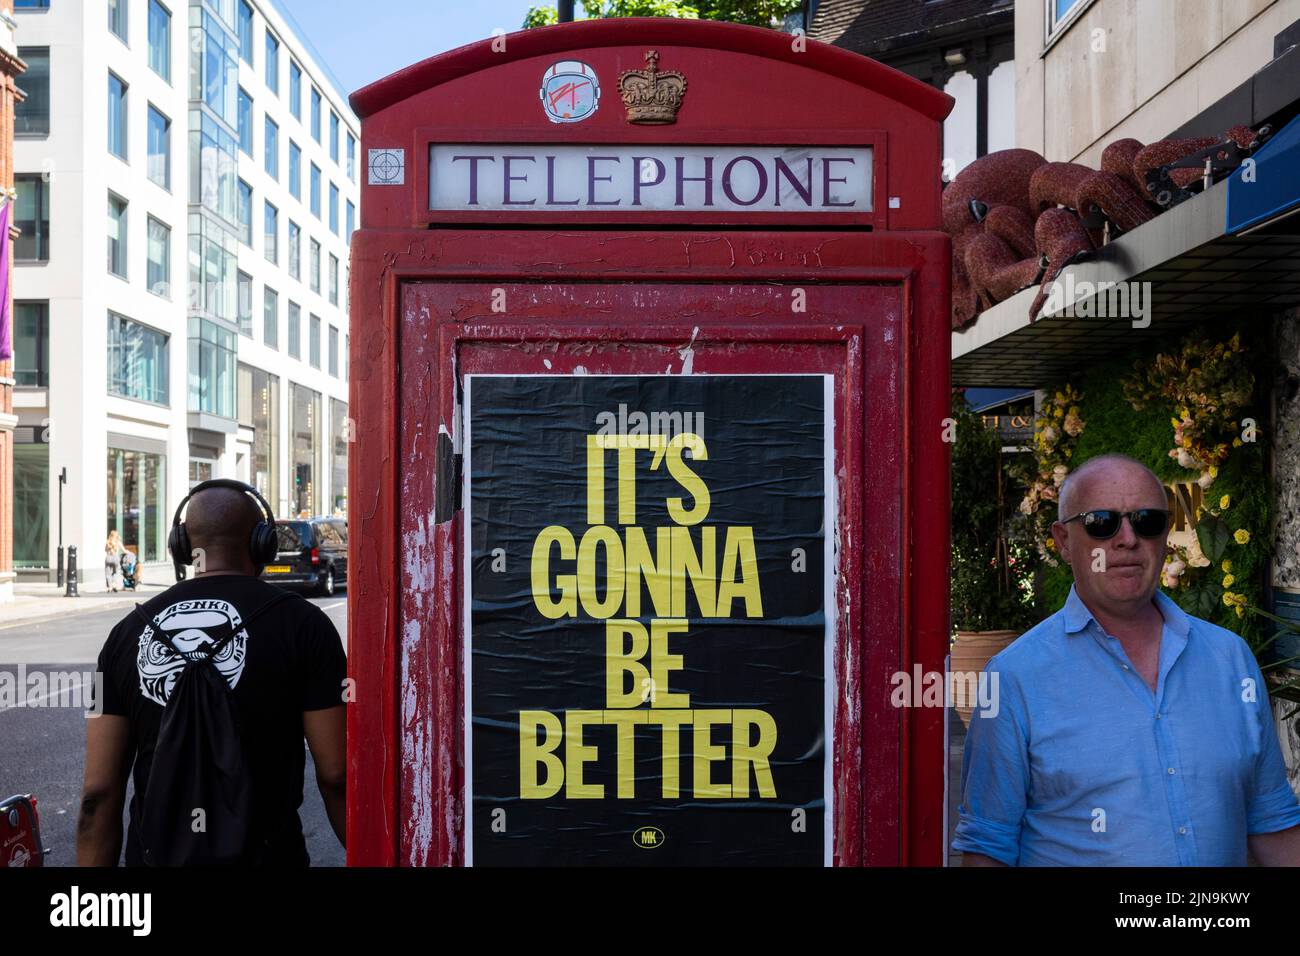 London, UK.  10 August 2022.  People walk past a telephone box in Mayfair which carries a promotional message “It’s Gonna Be Better”.  Given the UK’s current economic woes, rising inflation rate, rise in the base rate, cost of living crisis and drought conditions, some might see this as a hope for the future.  Credit: Stephen Chung / Alamy Live News Stock Photo